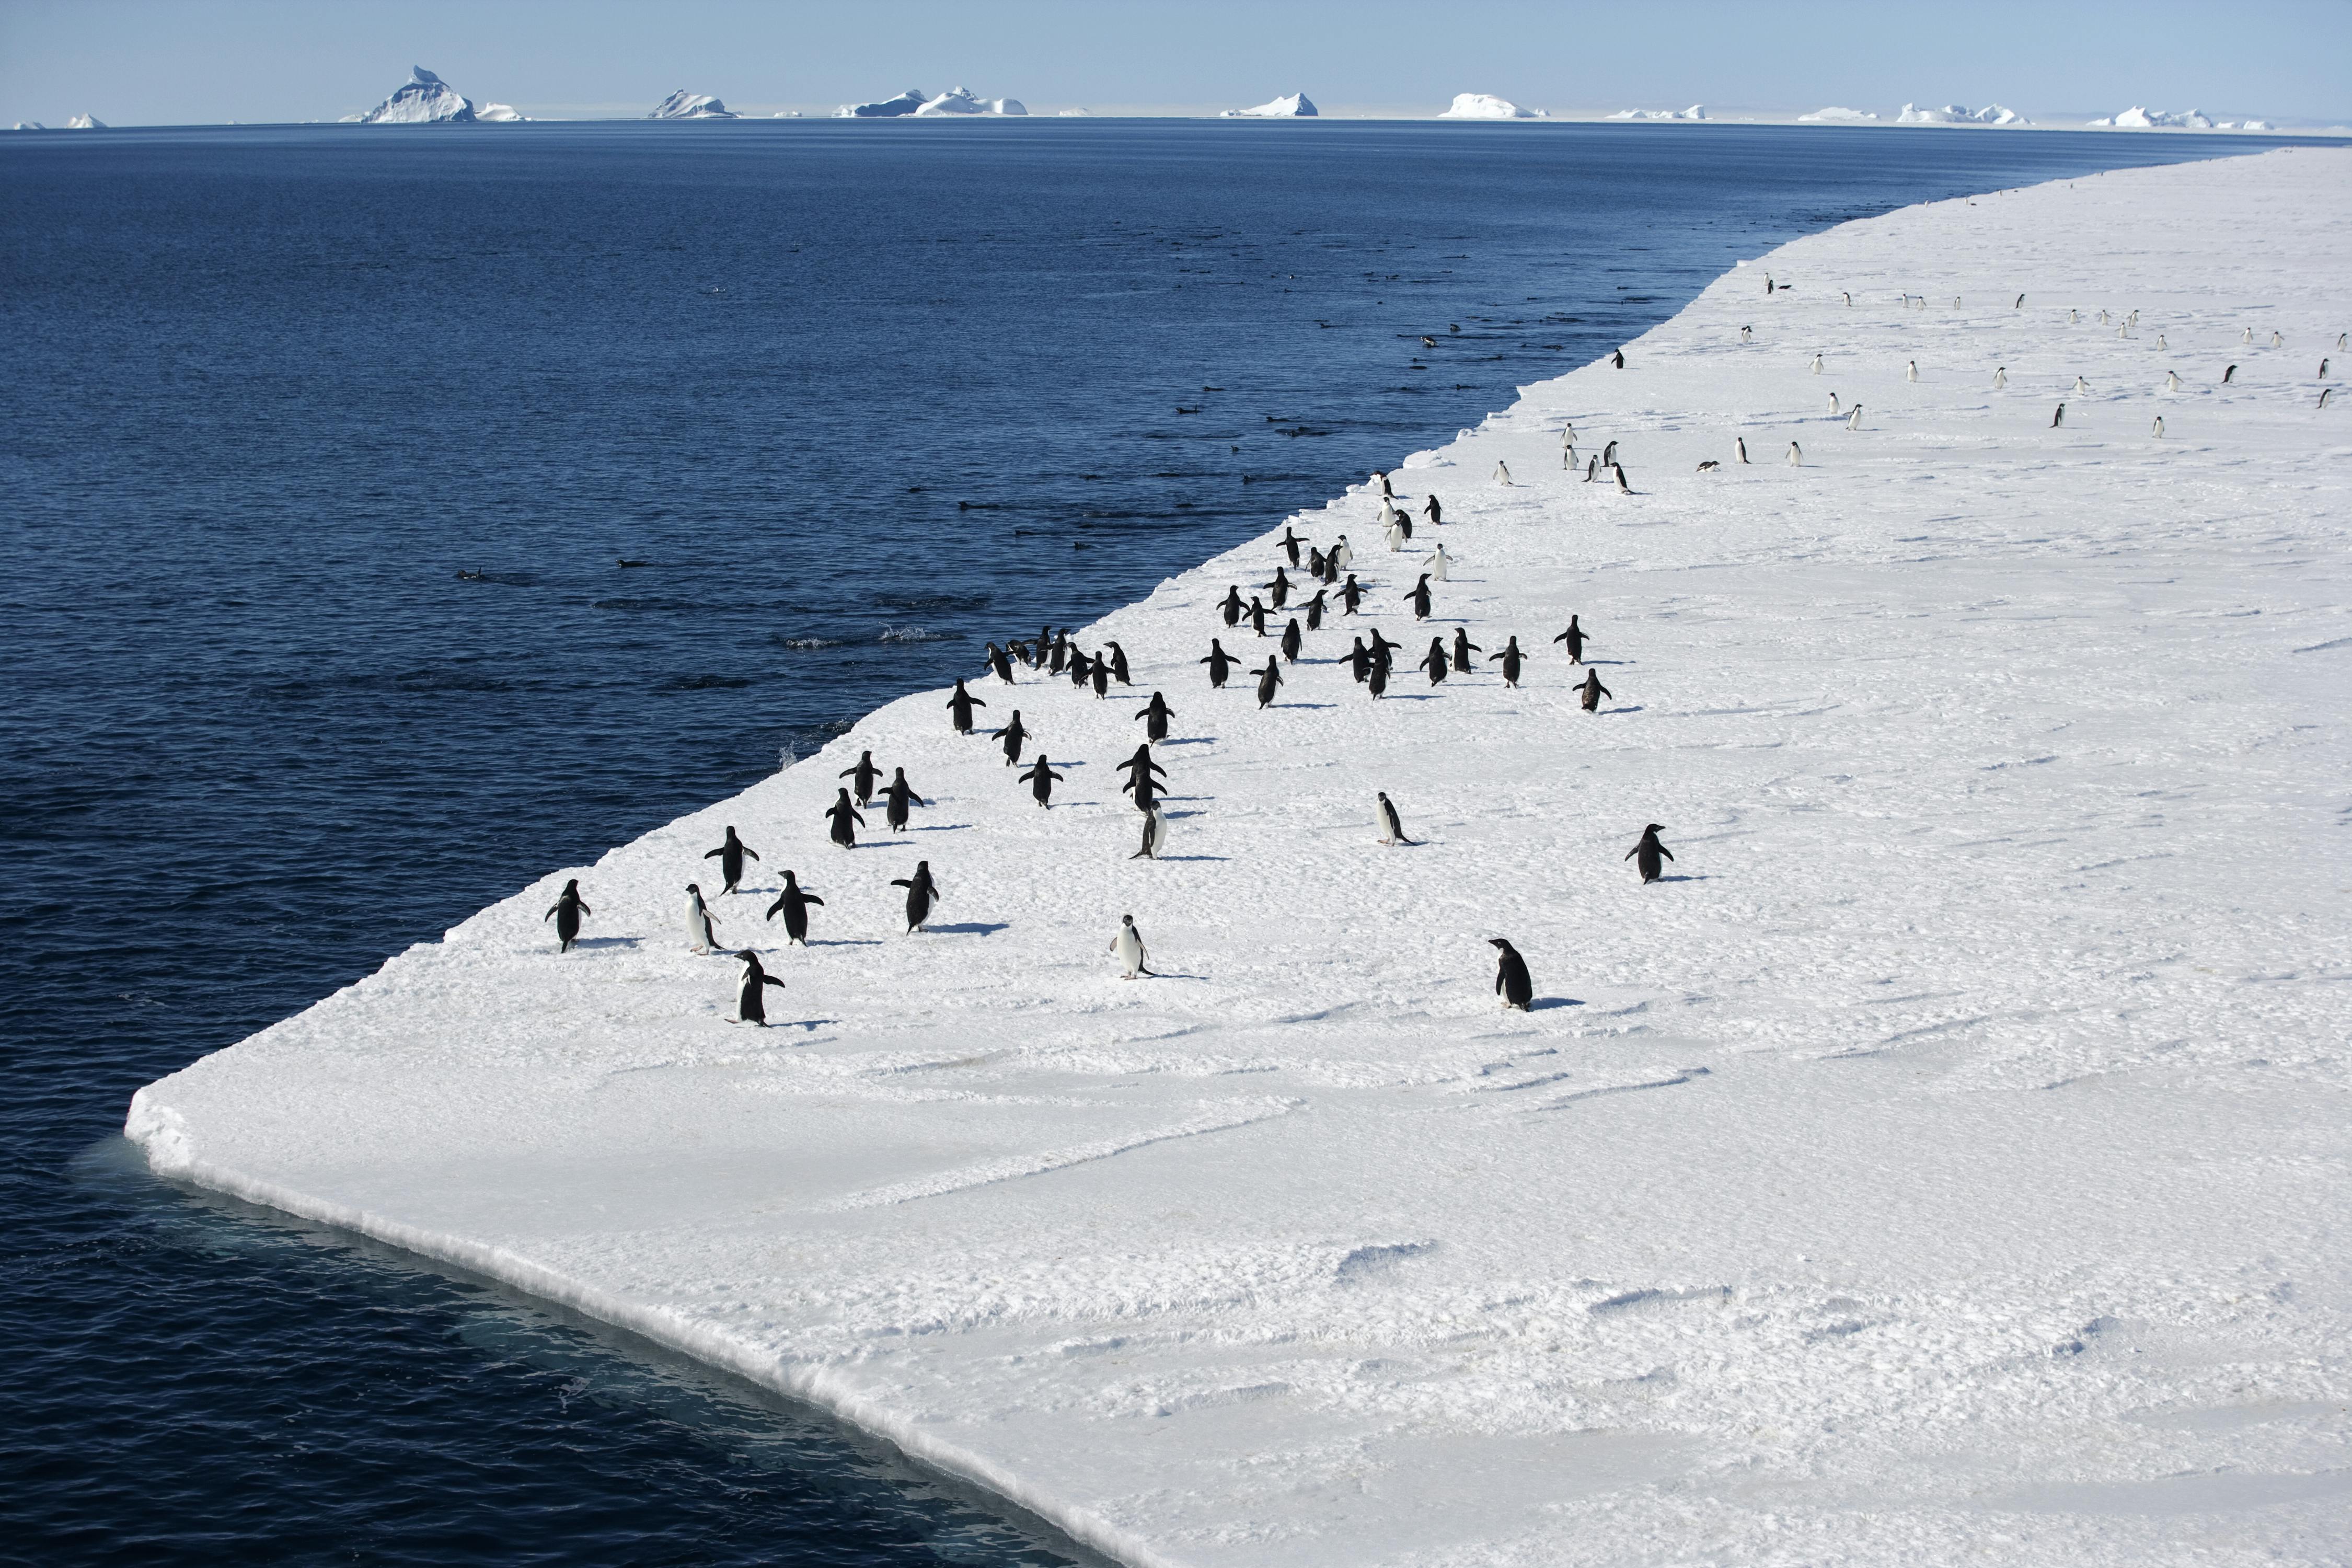 Antarctic ocean protection: Europe’s role on the road to Santiago